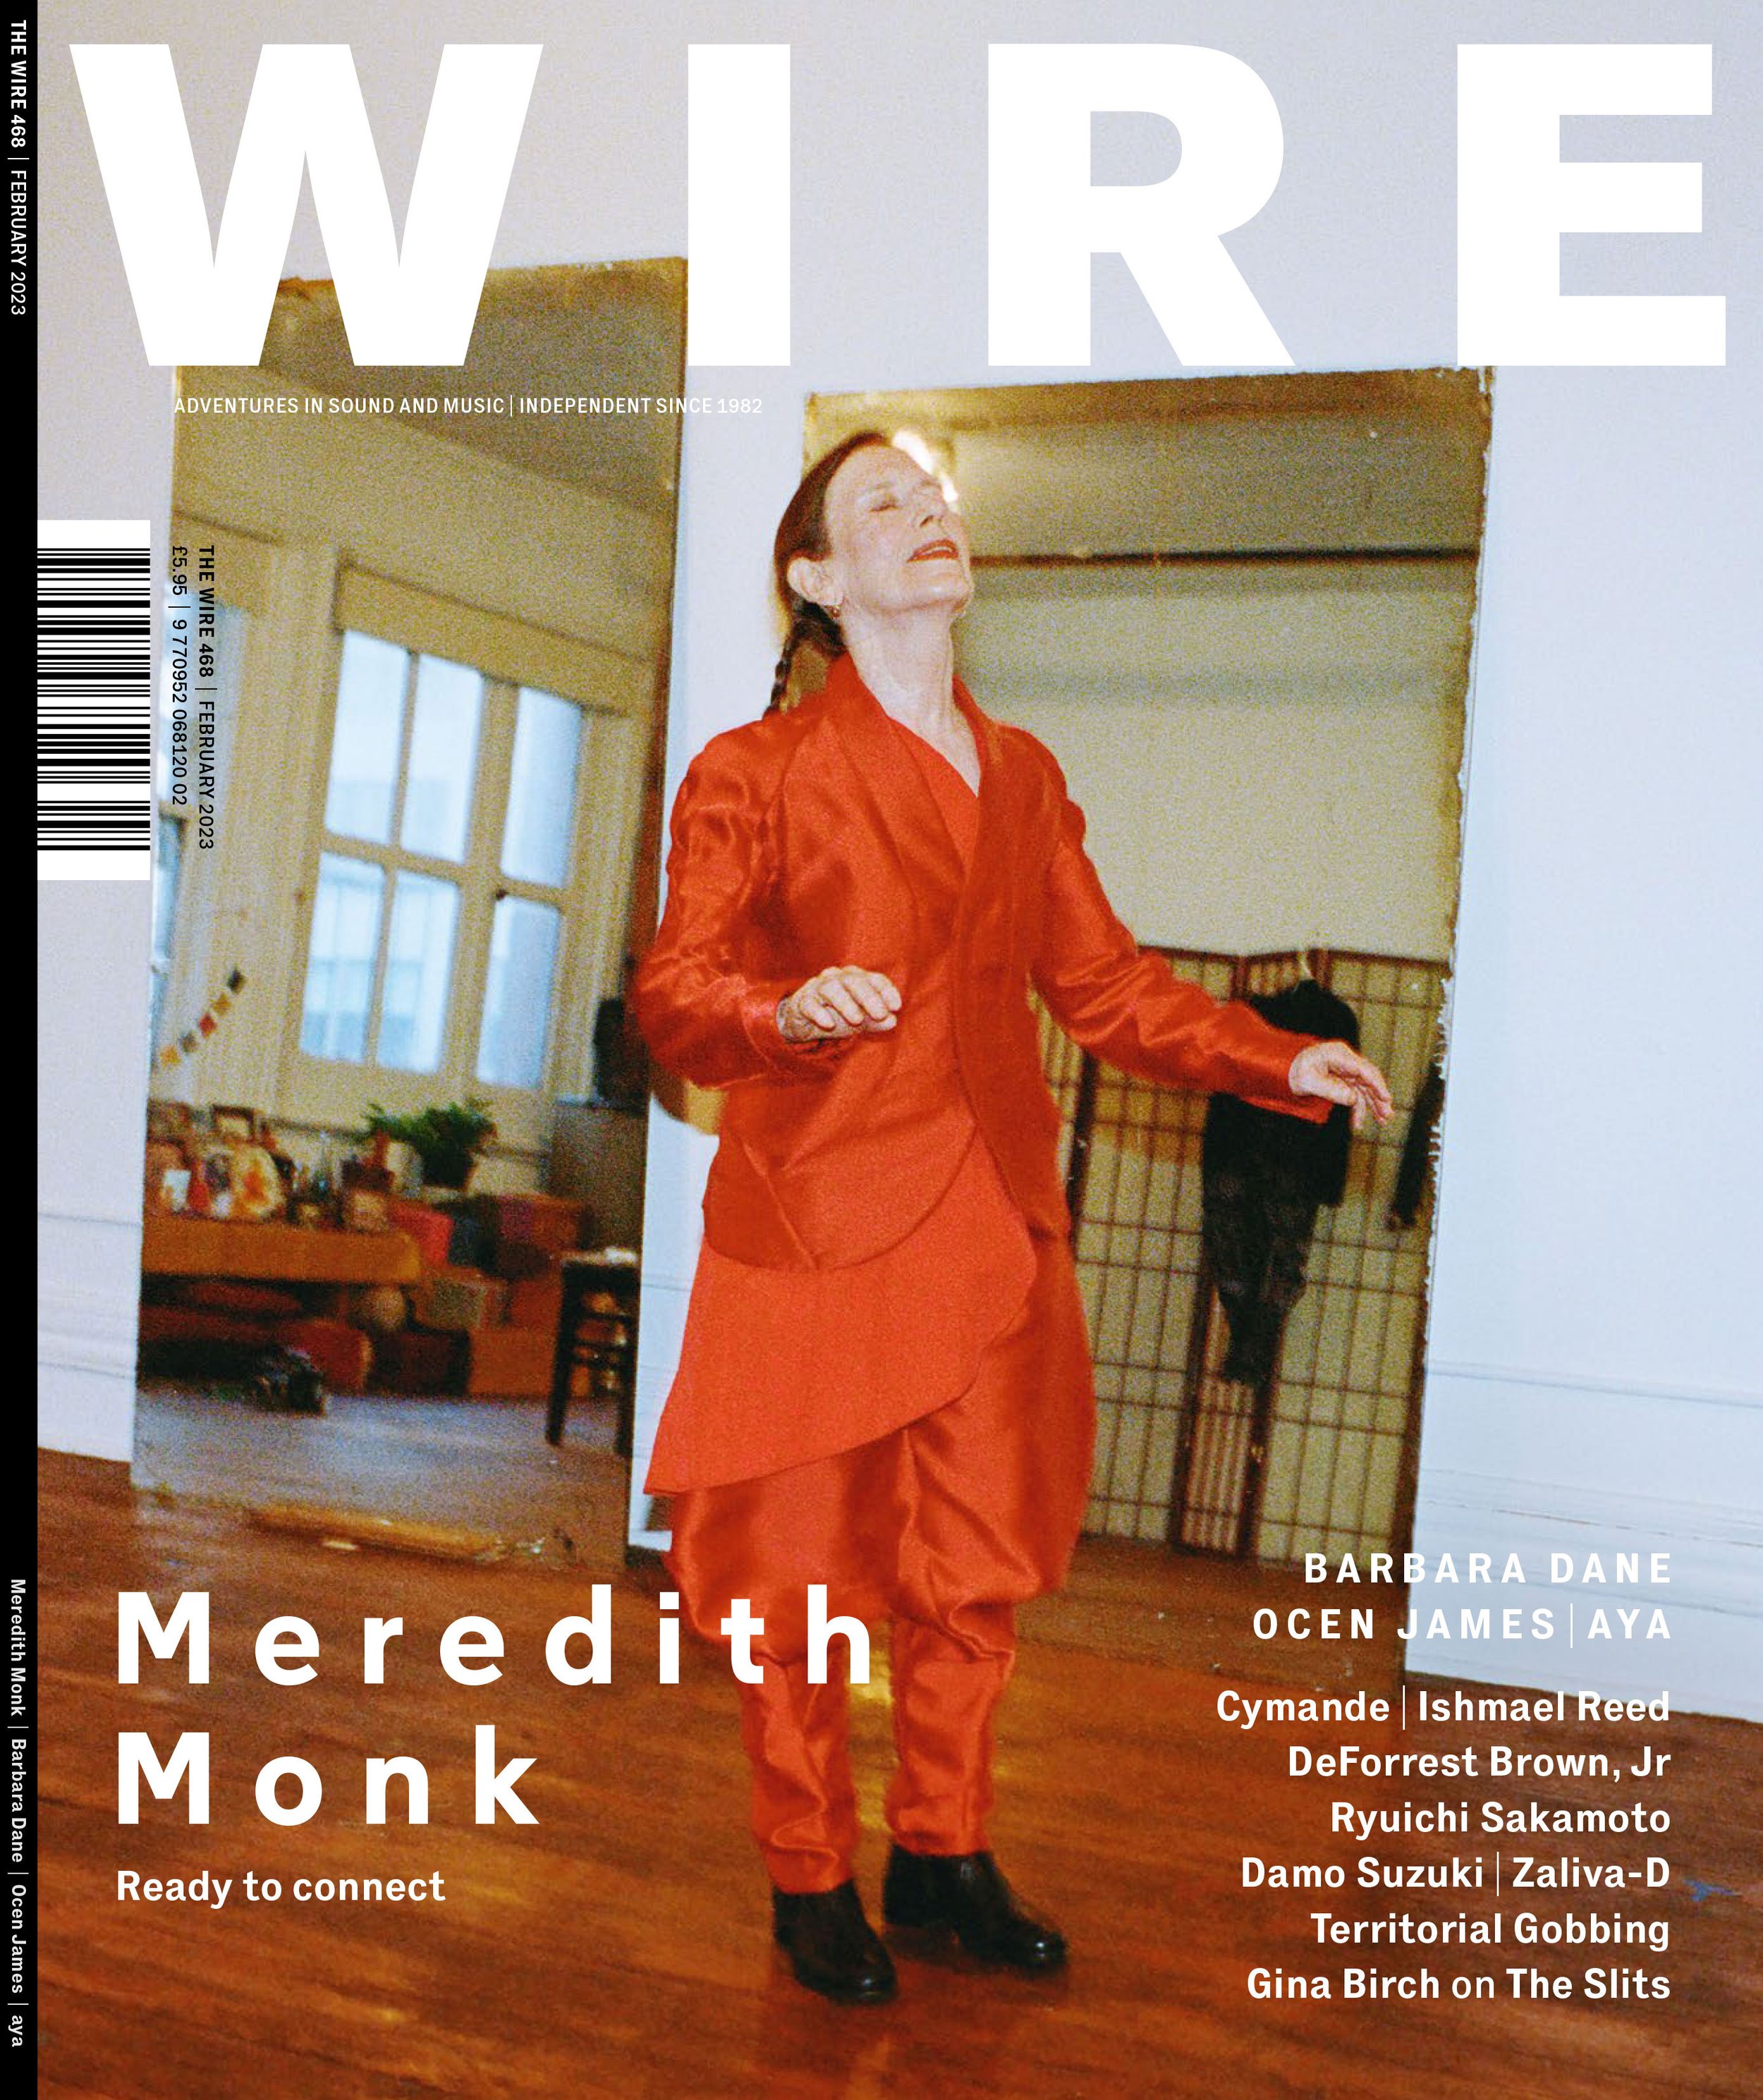  Meredith Monk for issue 468 of The Wire Magazine. 